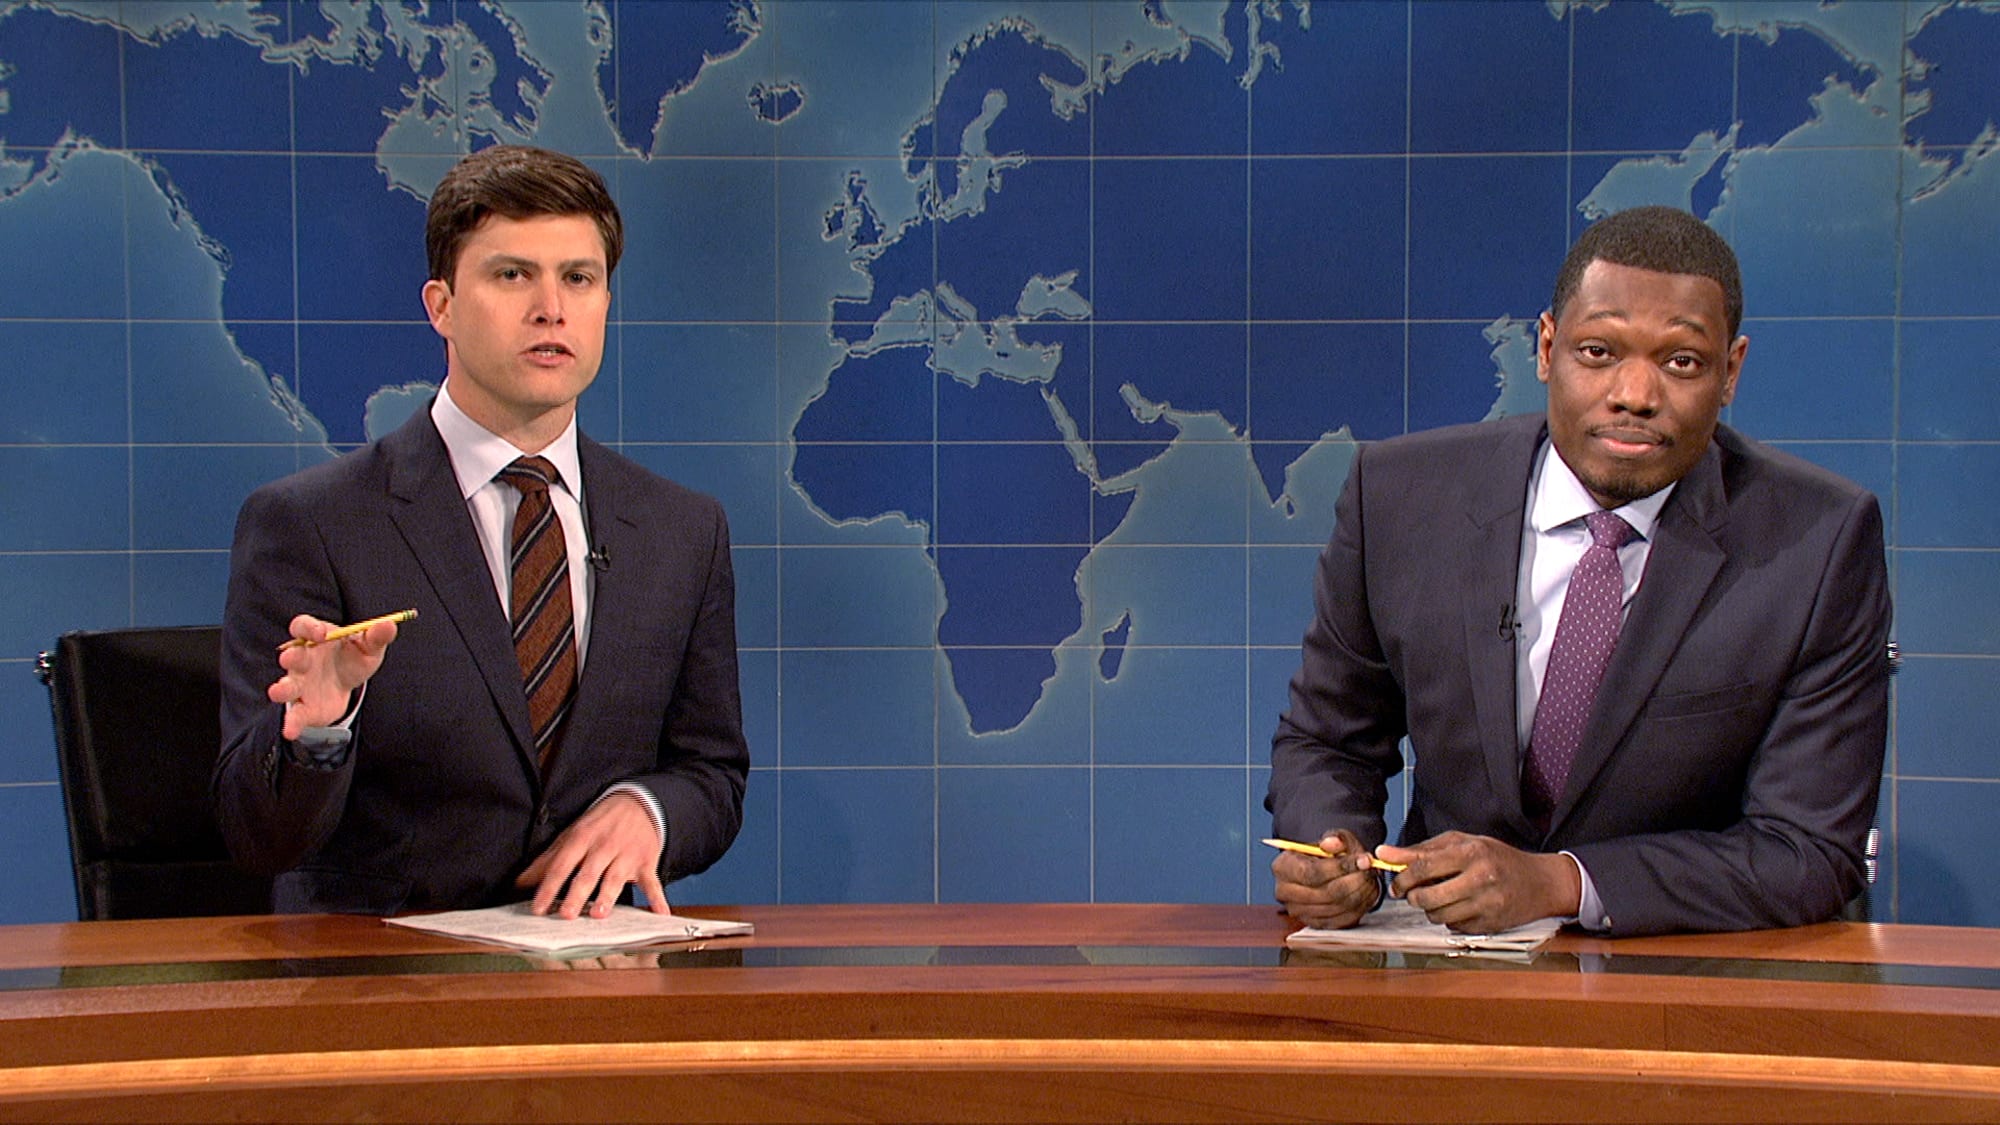 SNL's Weekend Update convention editions to air on MSNBC